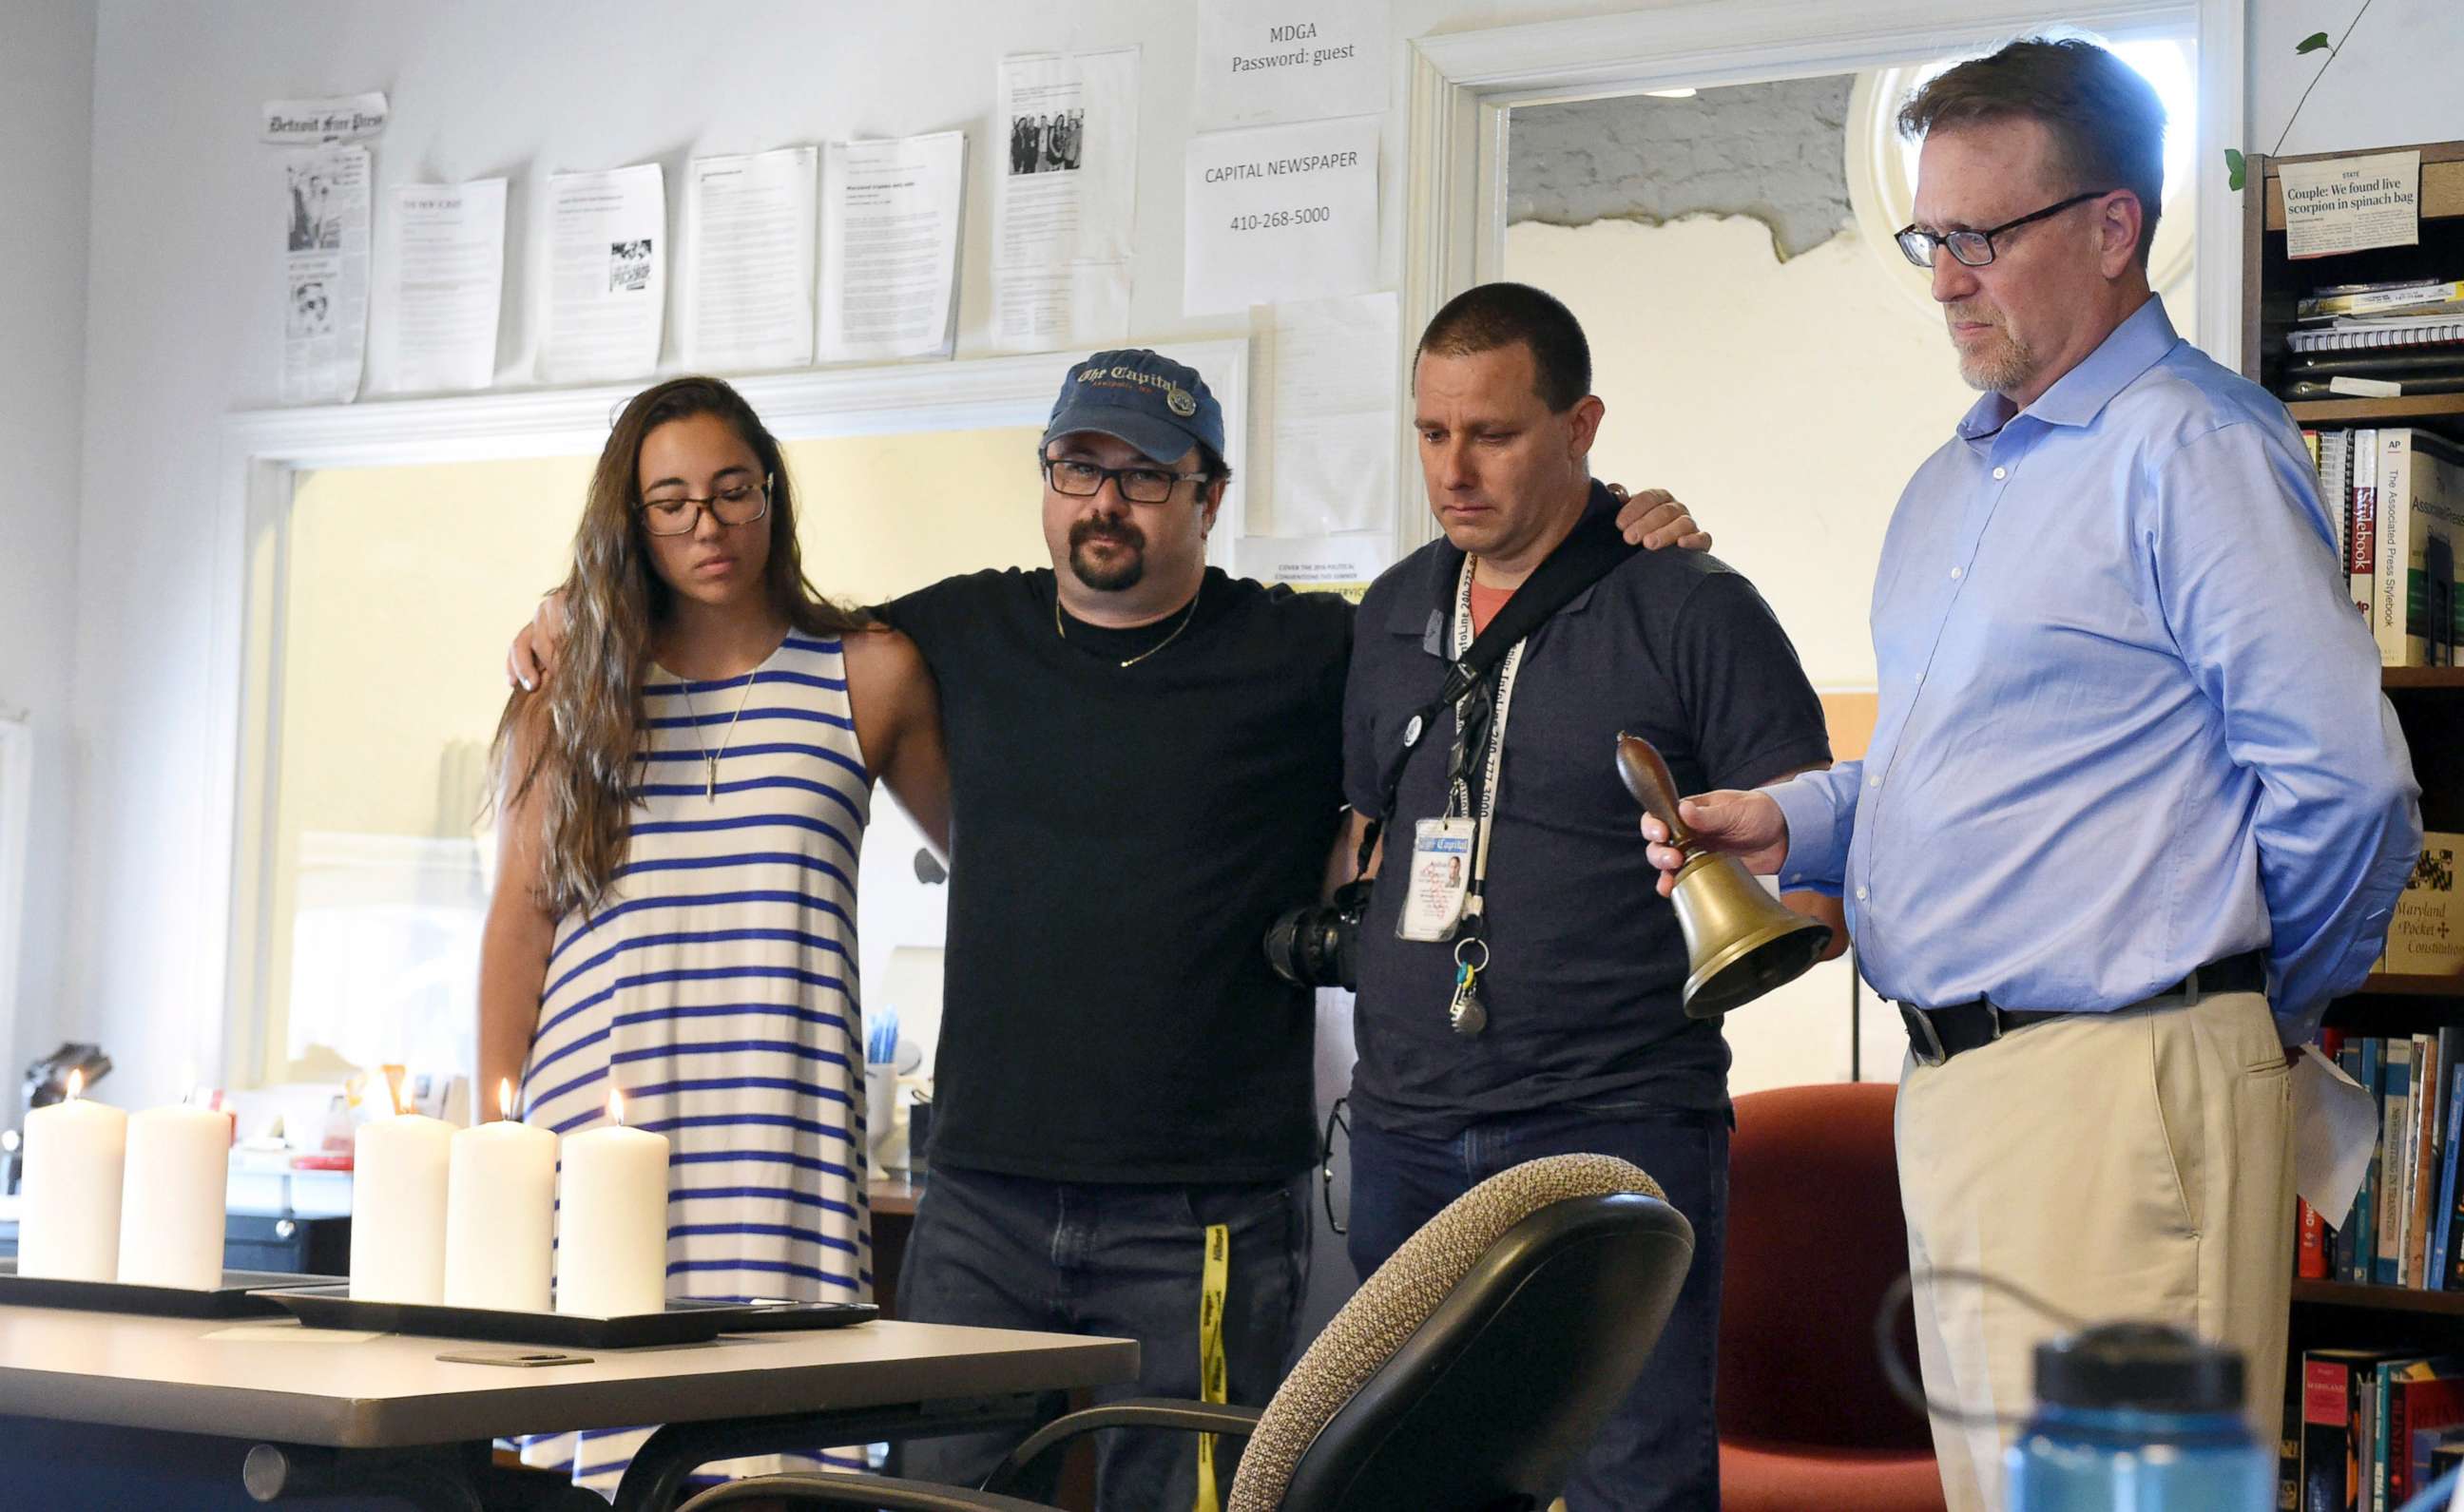 PHOTO: Rick Hutzell, right, the editor for Capital Gazette, from left, reporter Selene San Felice, and photojournalists Paul W. Gillespie and Joshua McKerrow, as he rings a bell during a moment of silence at 2:33 p.m., July 5, 2018, in Annapolis, Md..